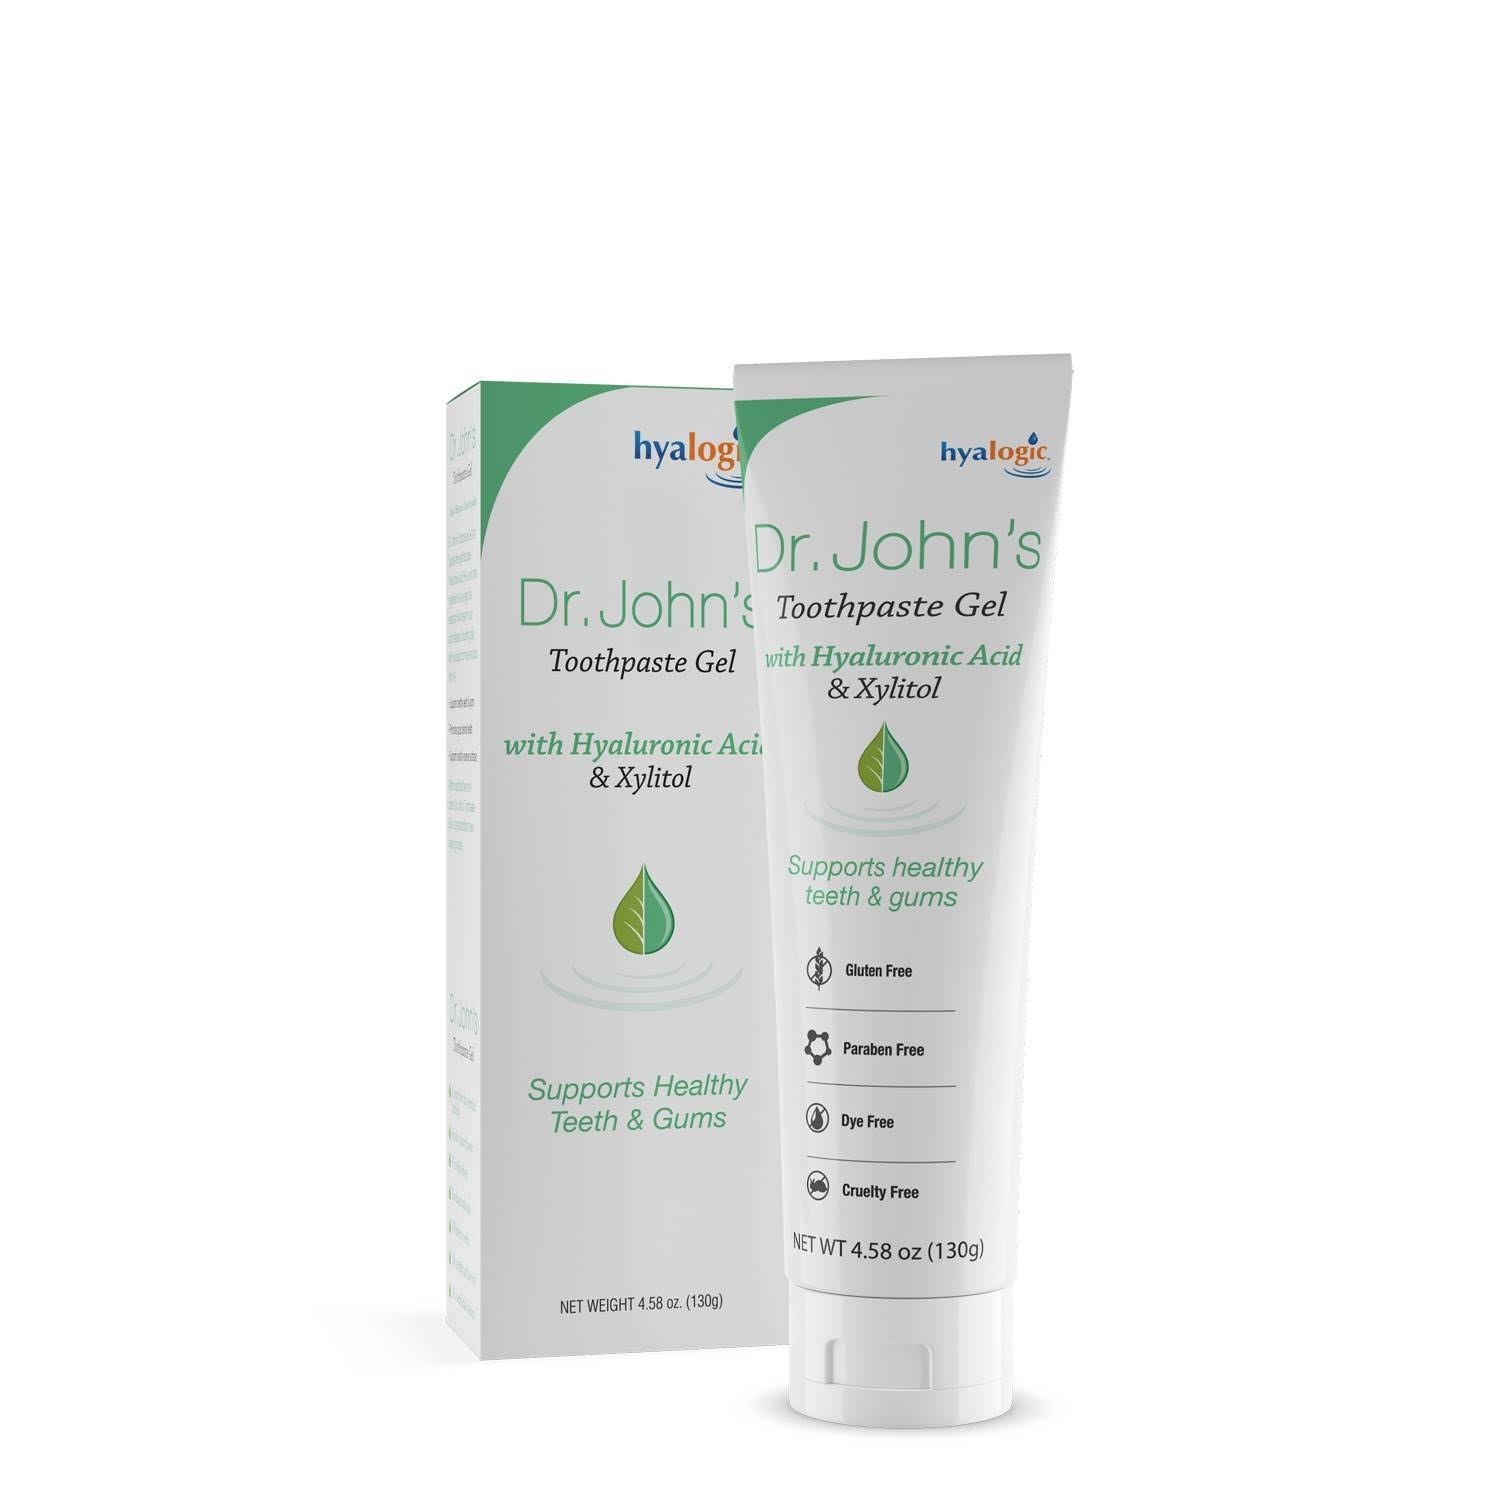 Dr. John's Formula All-Natural Toothpaste Gel - with Hyaluronic Acid